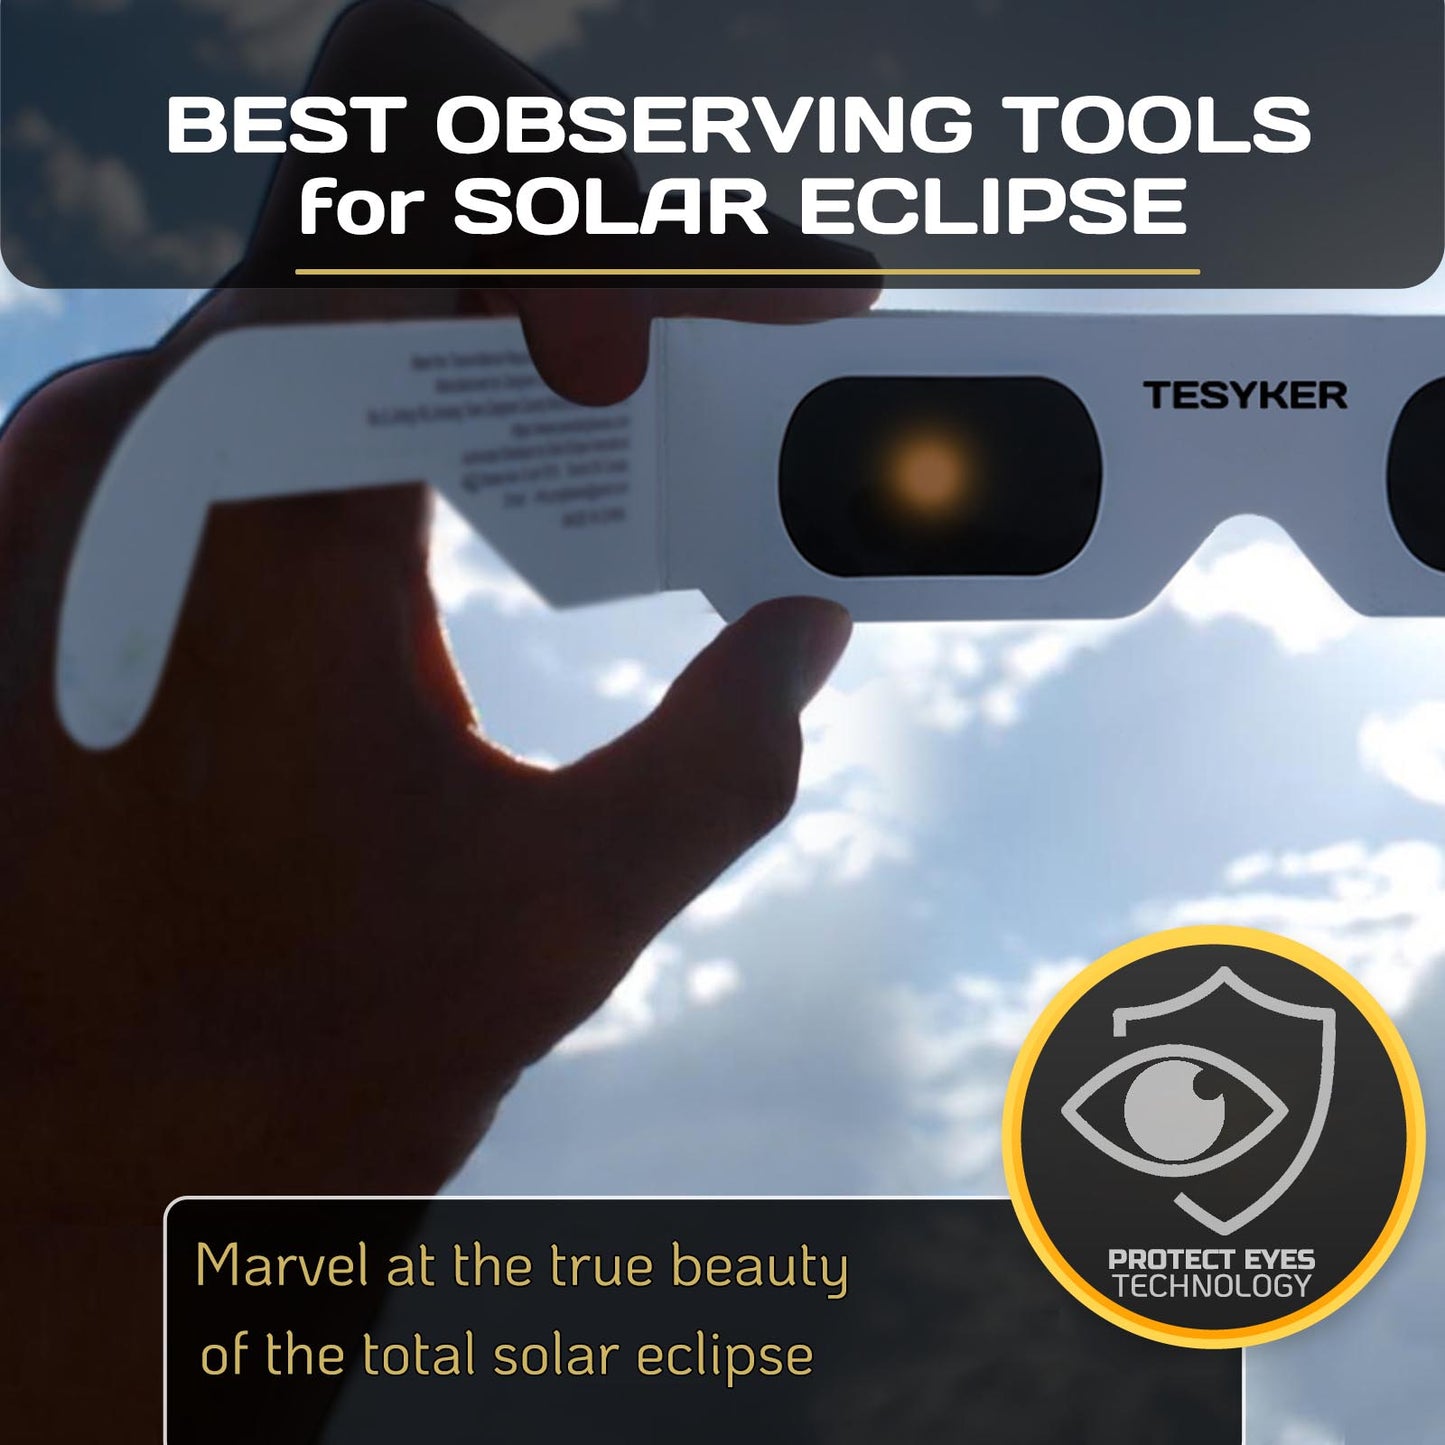 Paper Solar Eclipse Glasses , CE and ISO 12312-2:2015  Certified Safe Shades for Direct Sun Viewing (Purple Star Style)